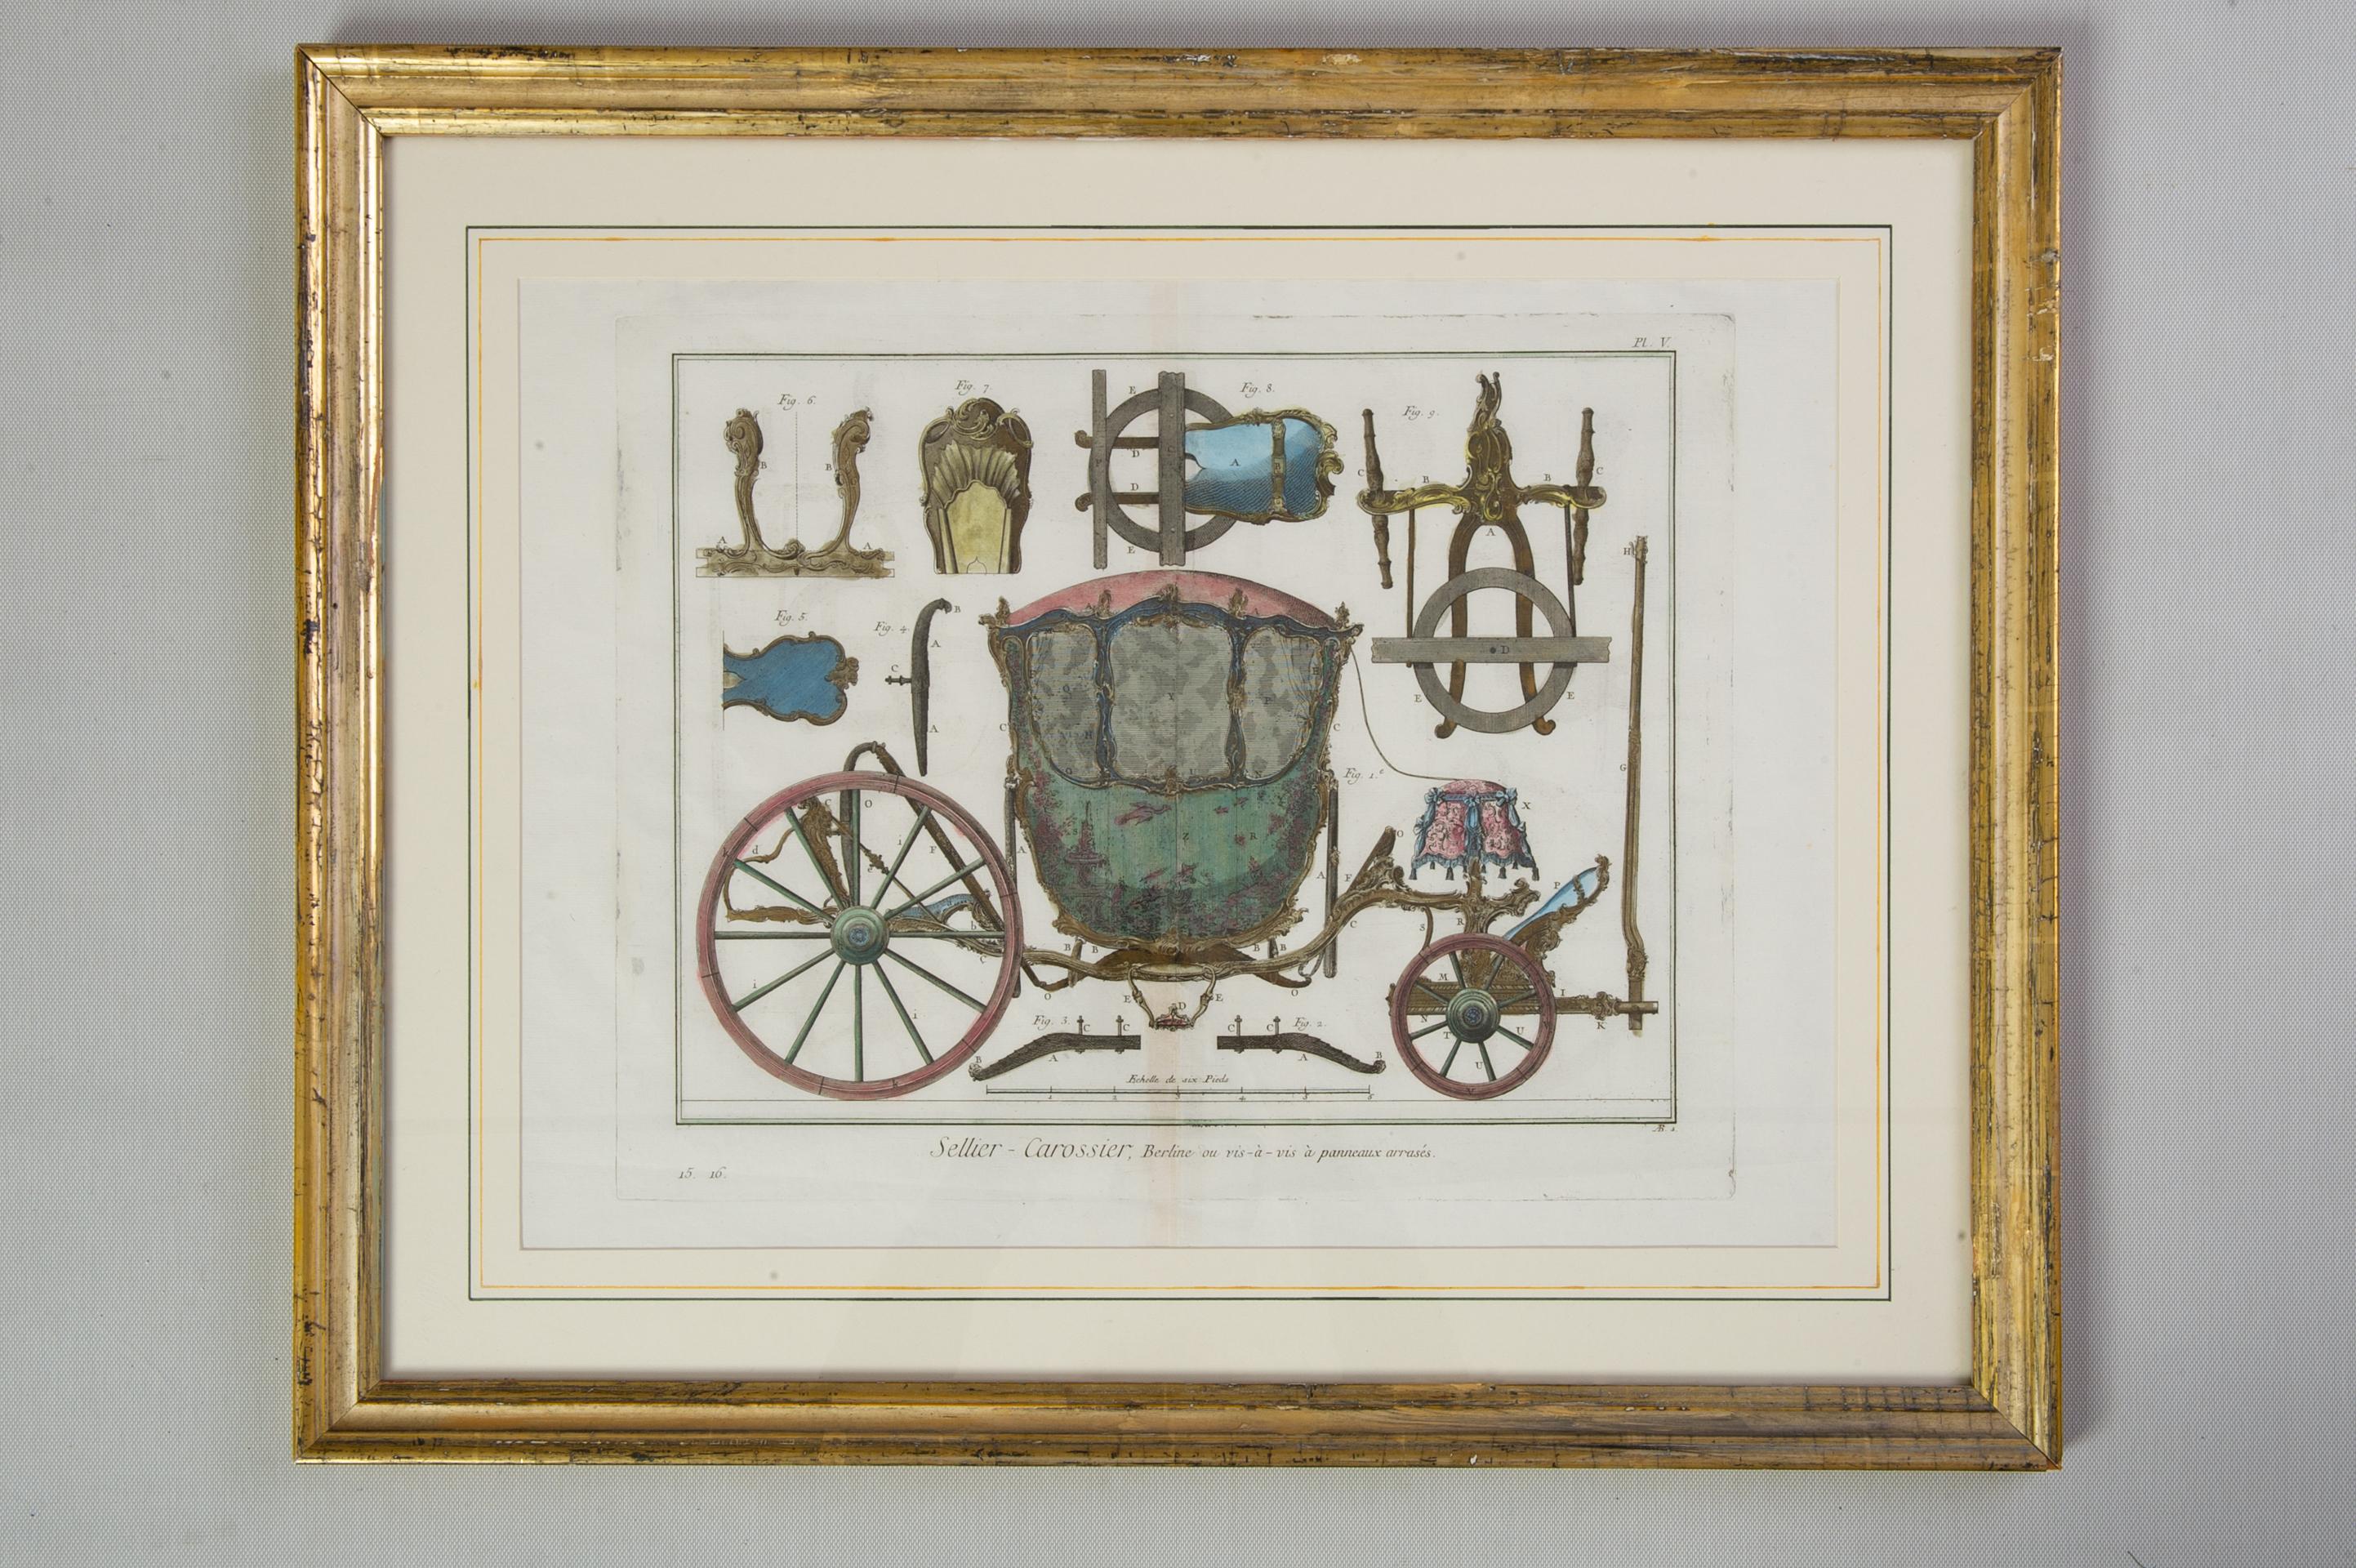 ST/530 - French Horsemanships 1774-1775 engravings by the famous Diderot & D'Alembert Encyclopedie - Paris -
They are the only two engravings of carriages in the intere Encyclopedia, therefore I framed them with two antique frames in gilded